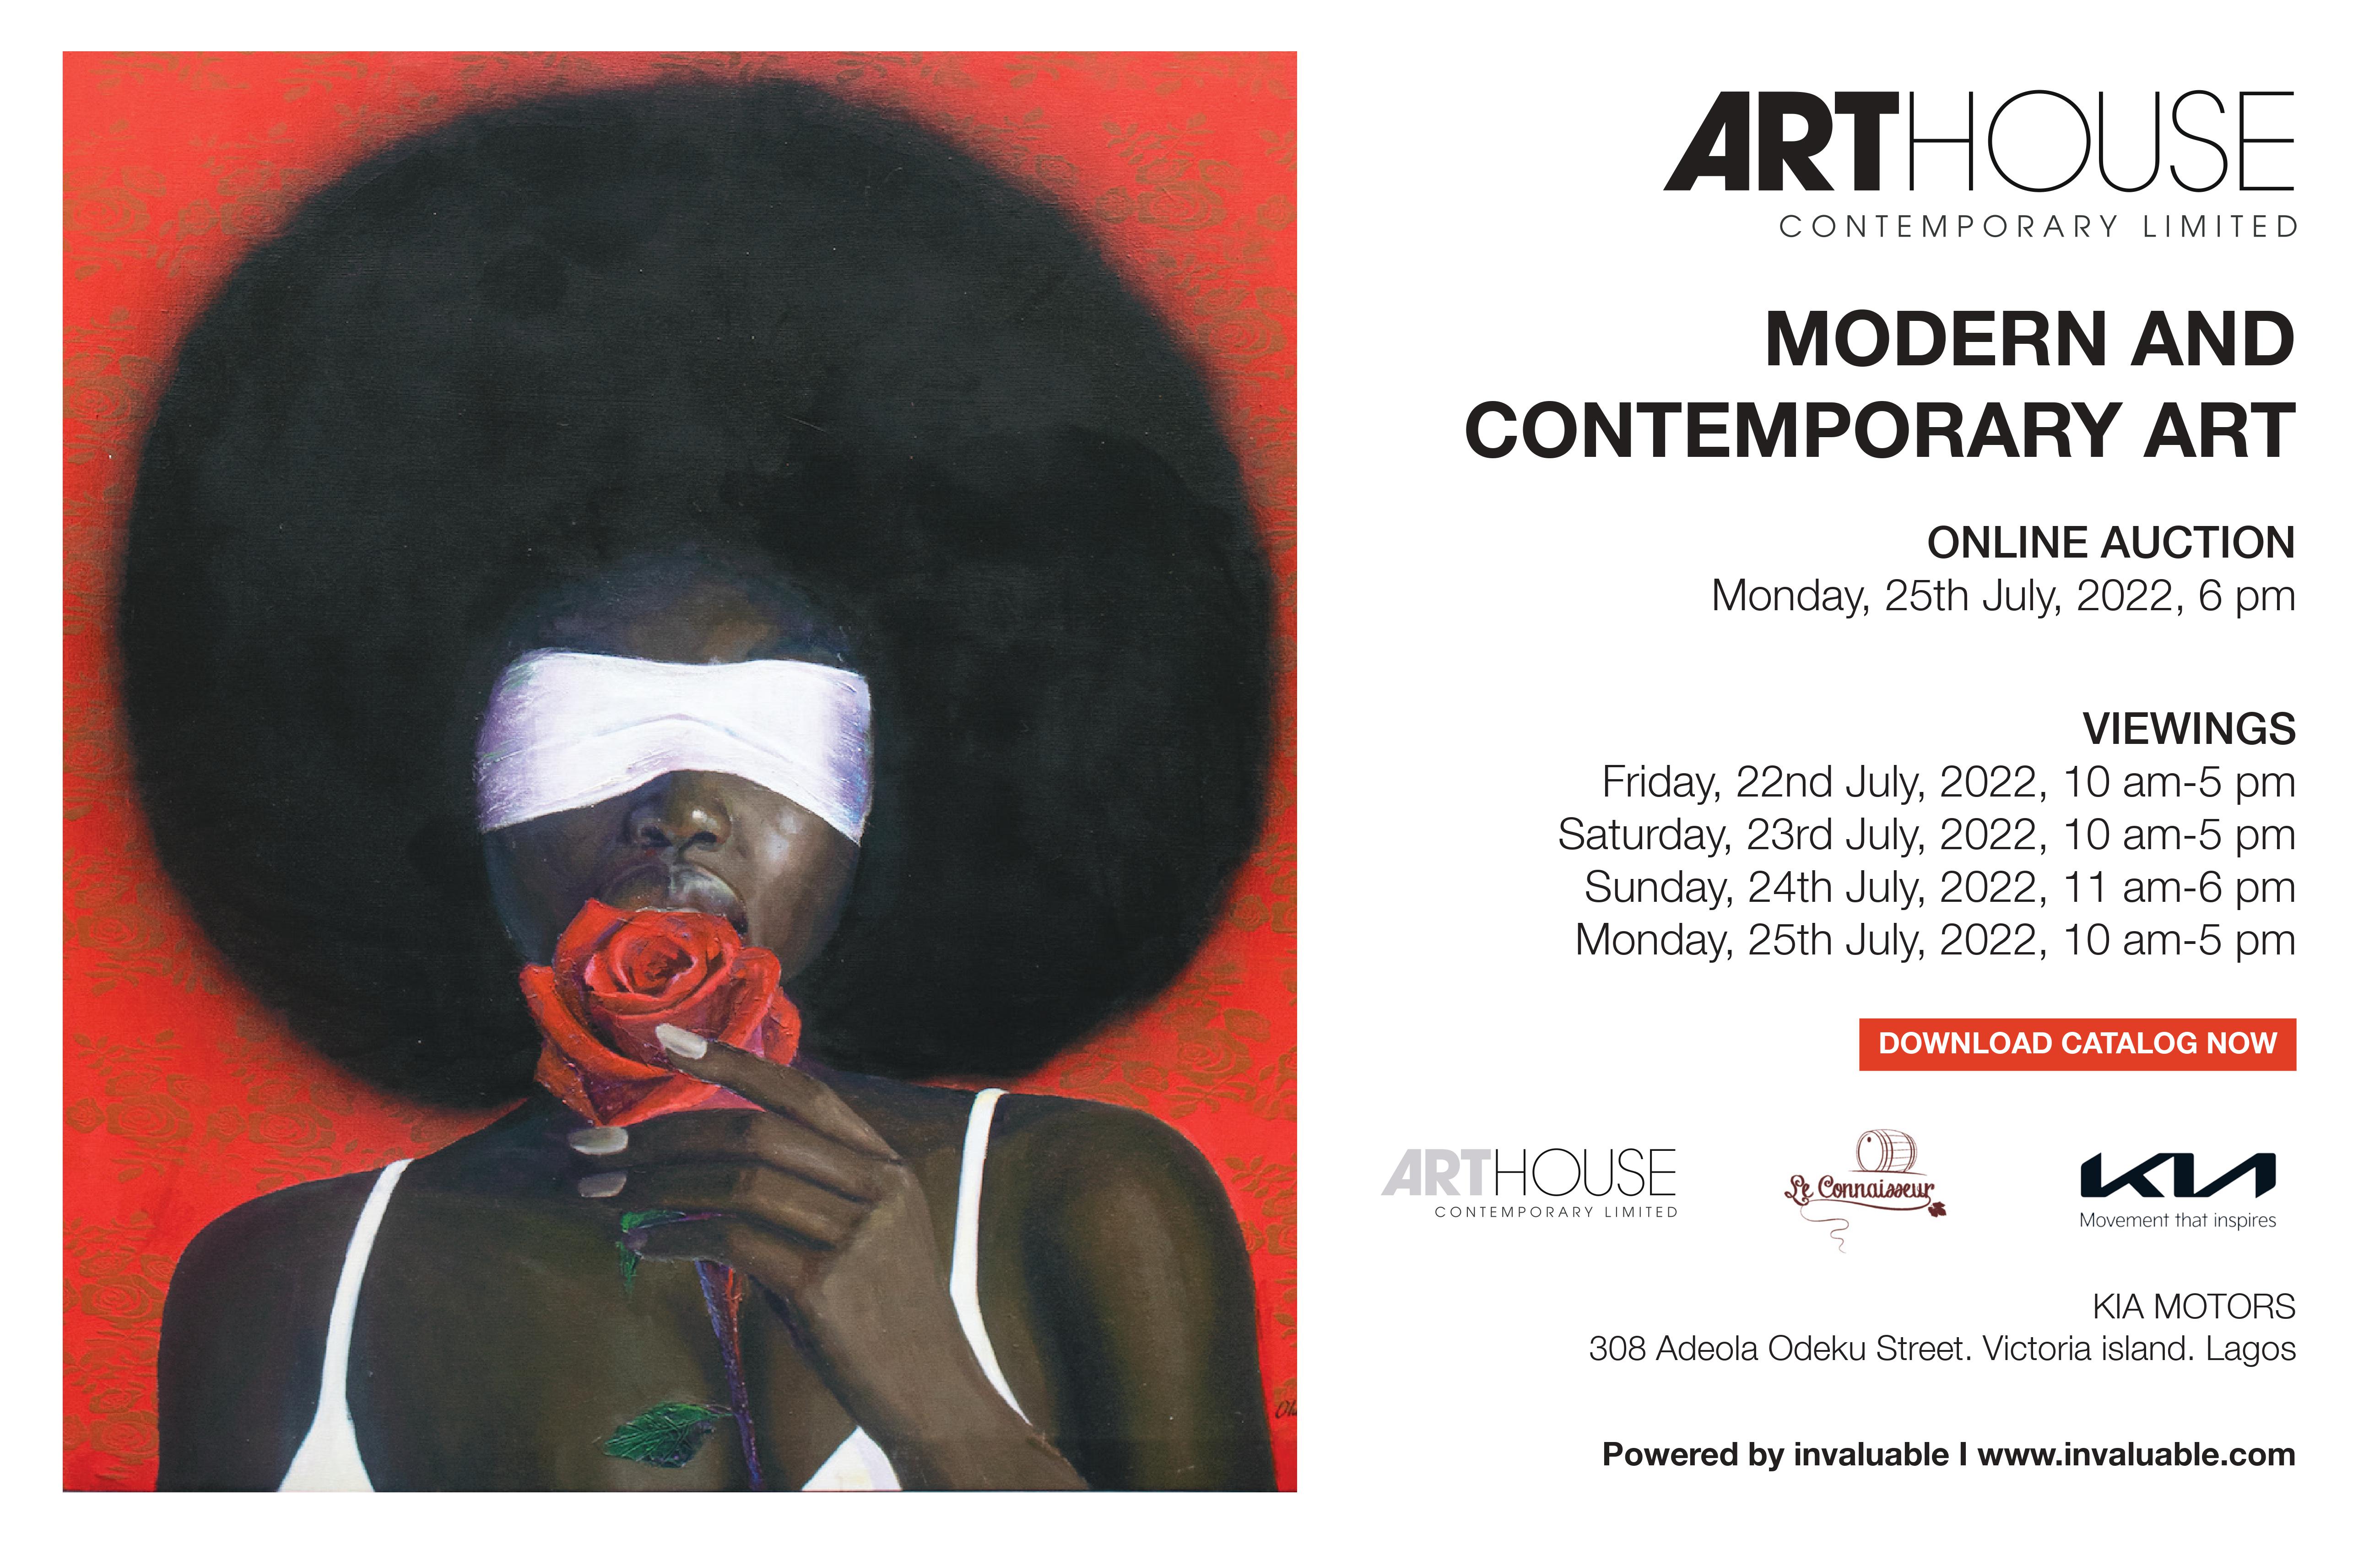 Modern and Contemporary Art Online Auction - Monday, 25th July, 2022, 6 pm